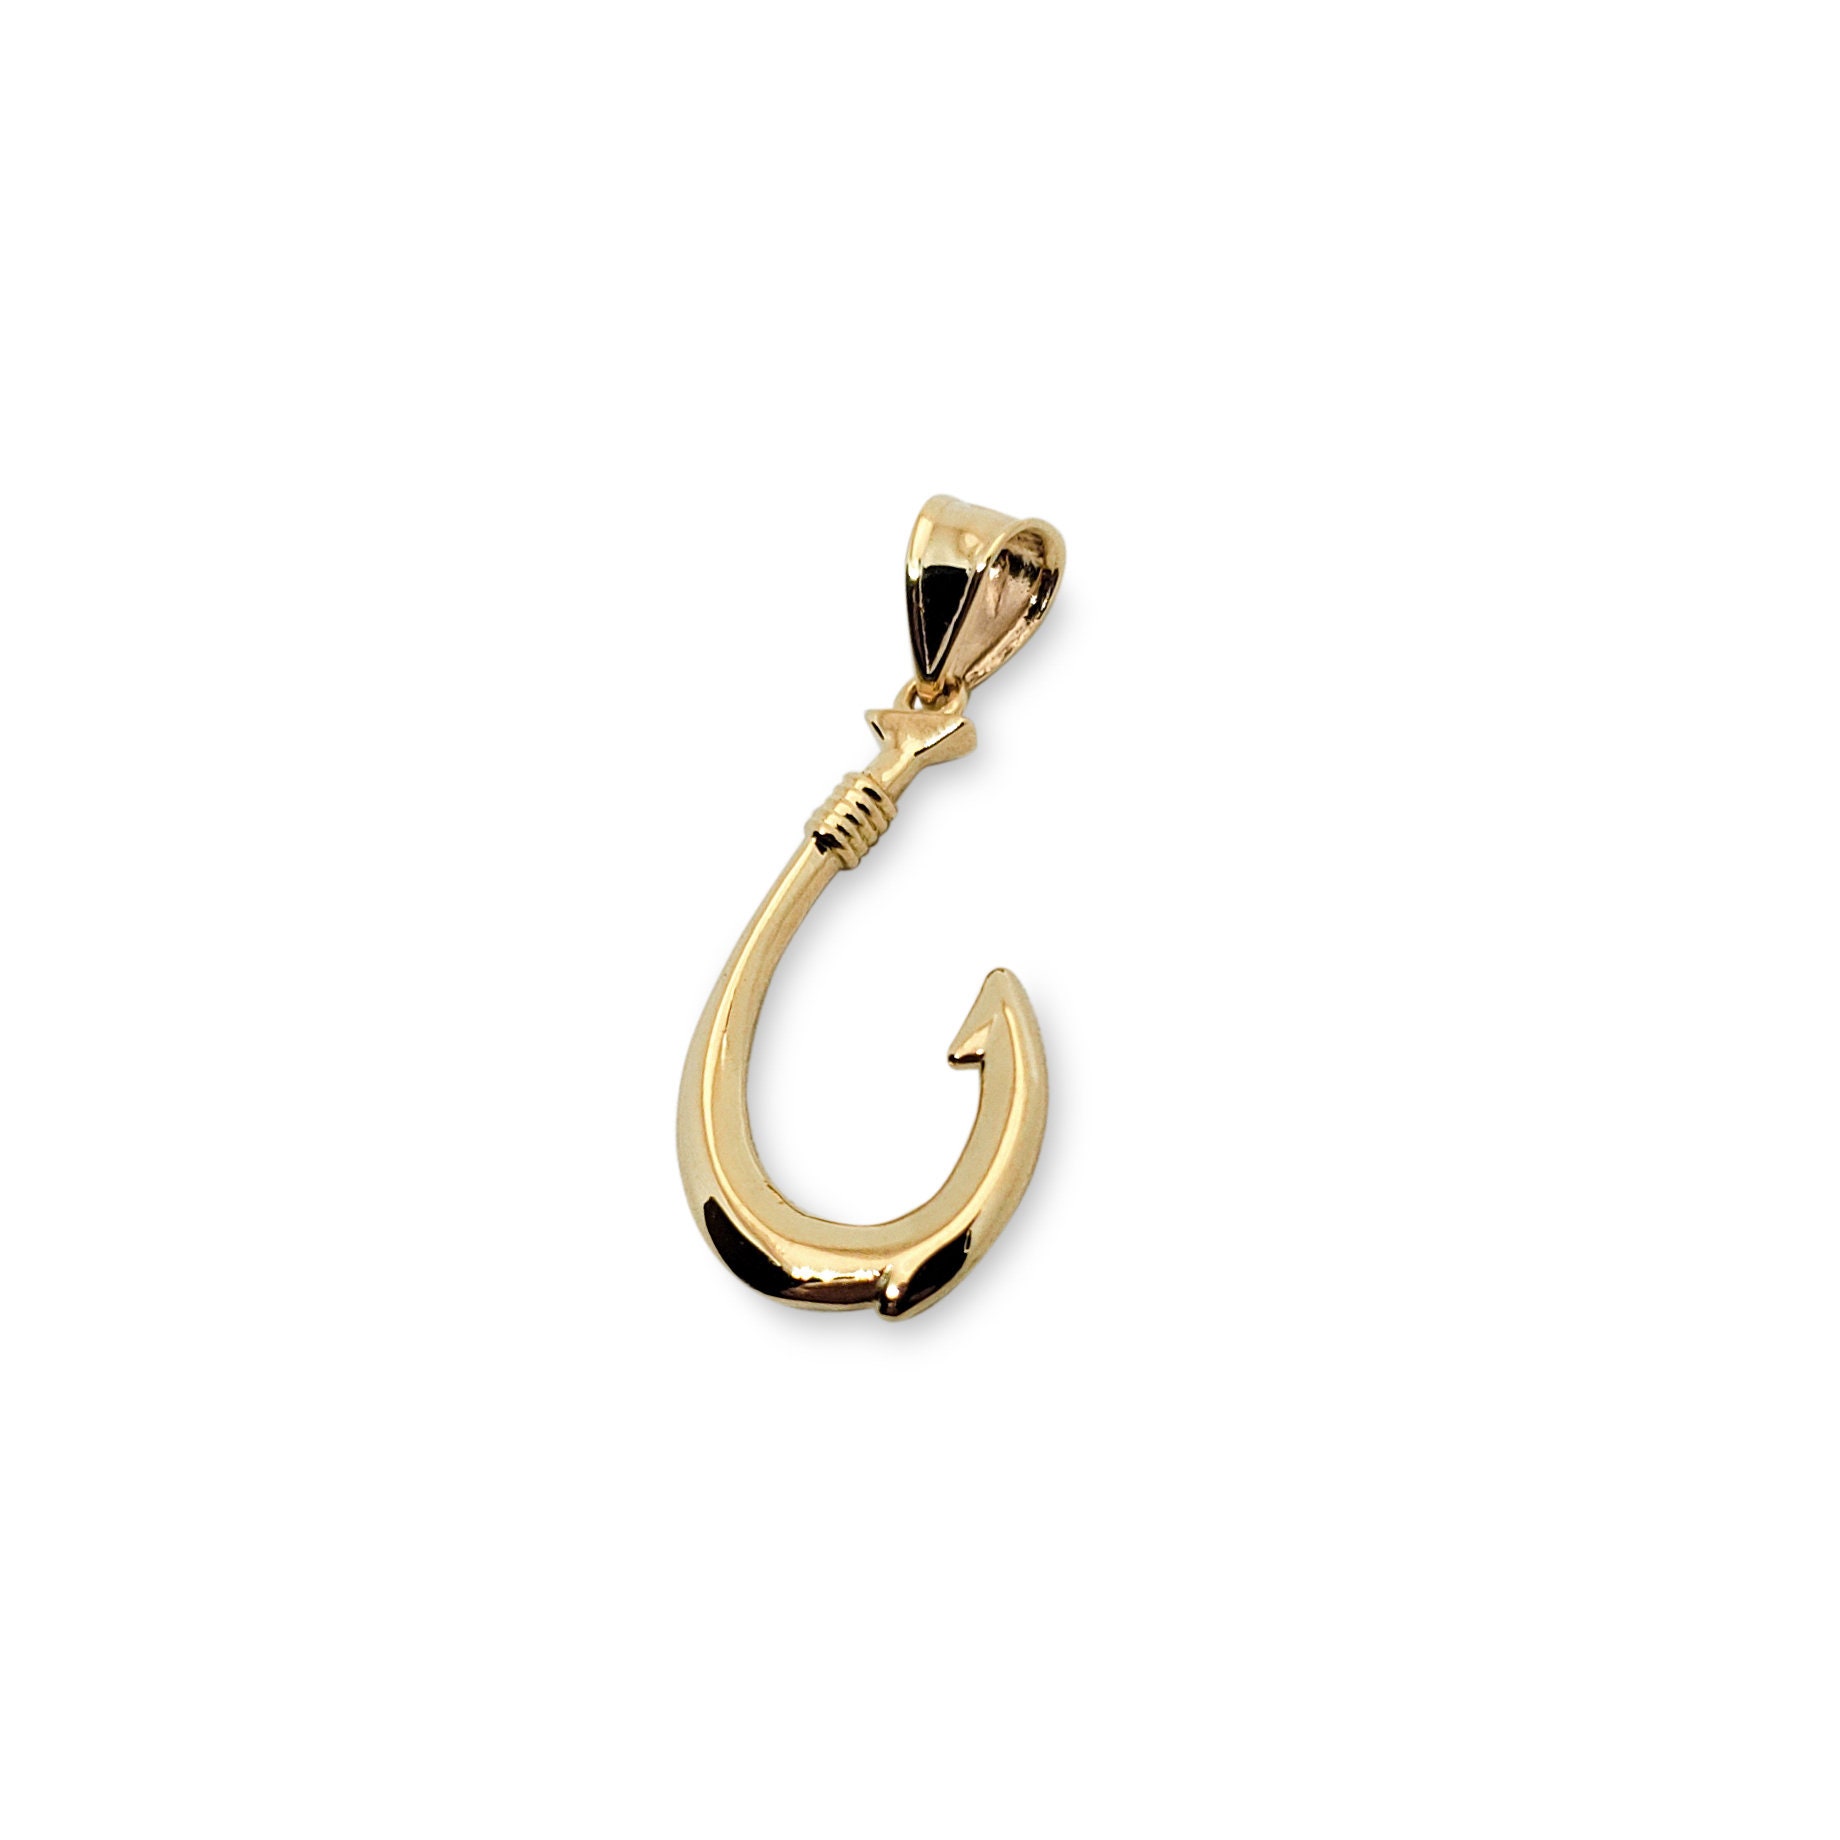 Buy Solid 18K Yellow White or Rose Gold Fish Hook Pendant, 1 1/16